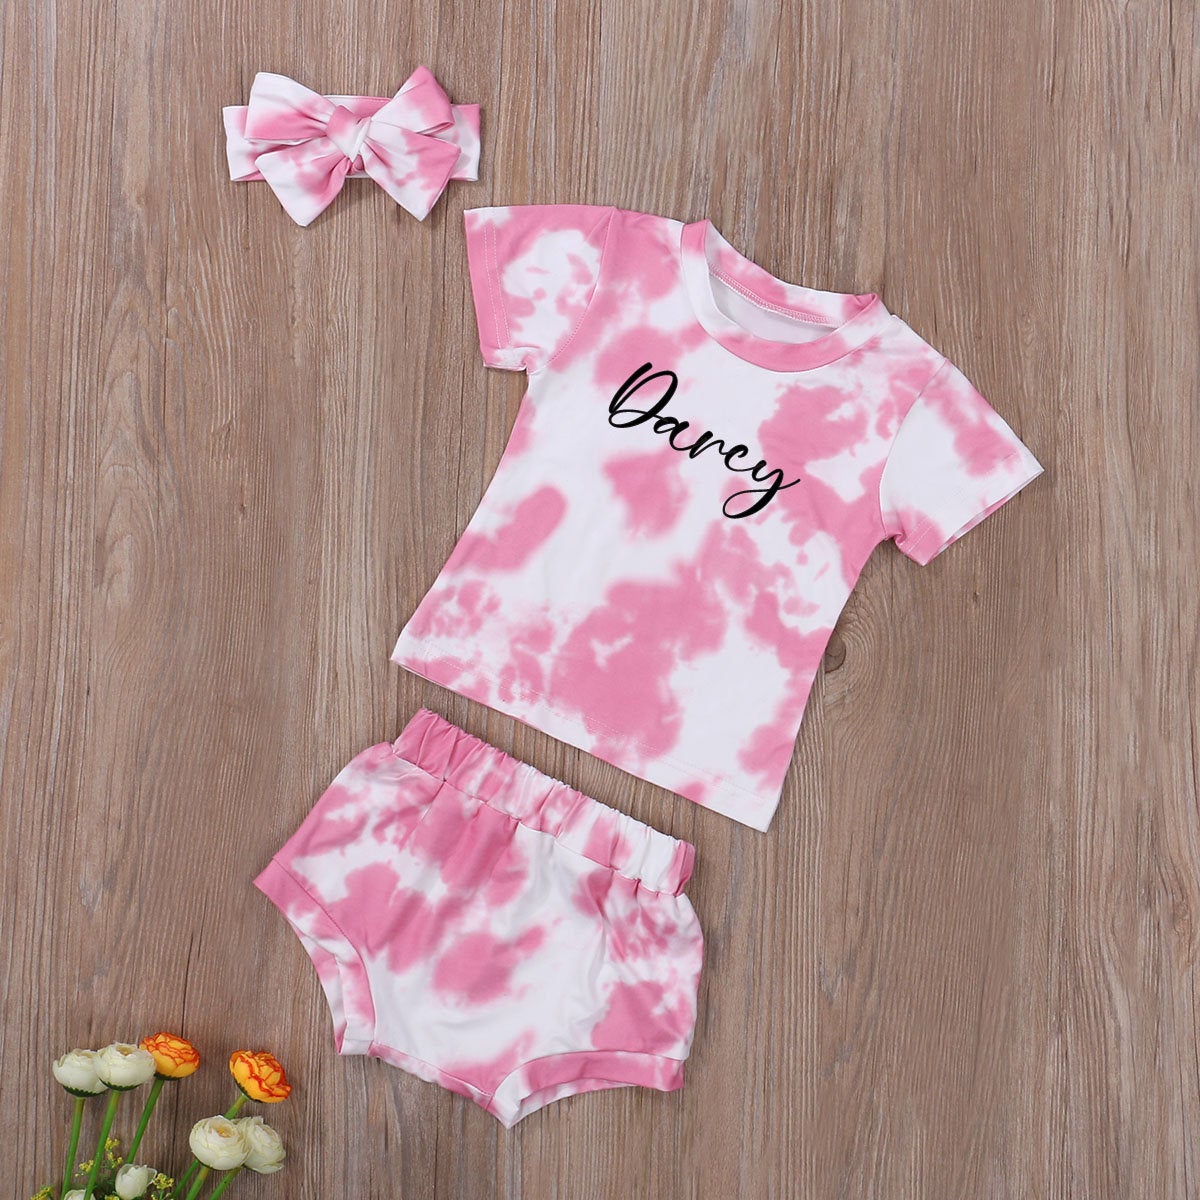 Baby Girl Tie Dye Shirt and Short Clothes Set